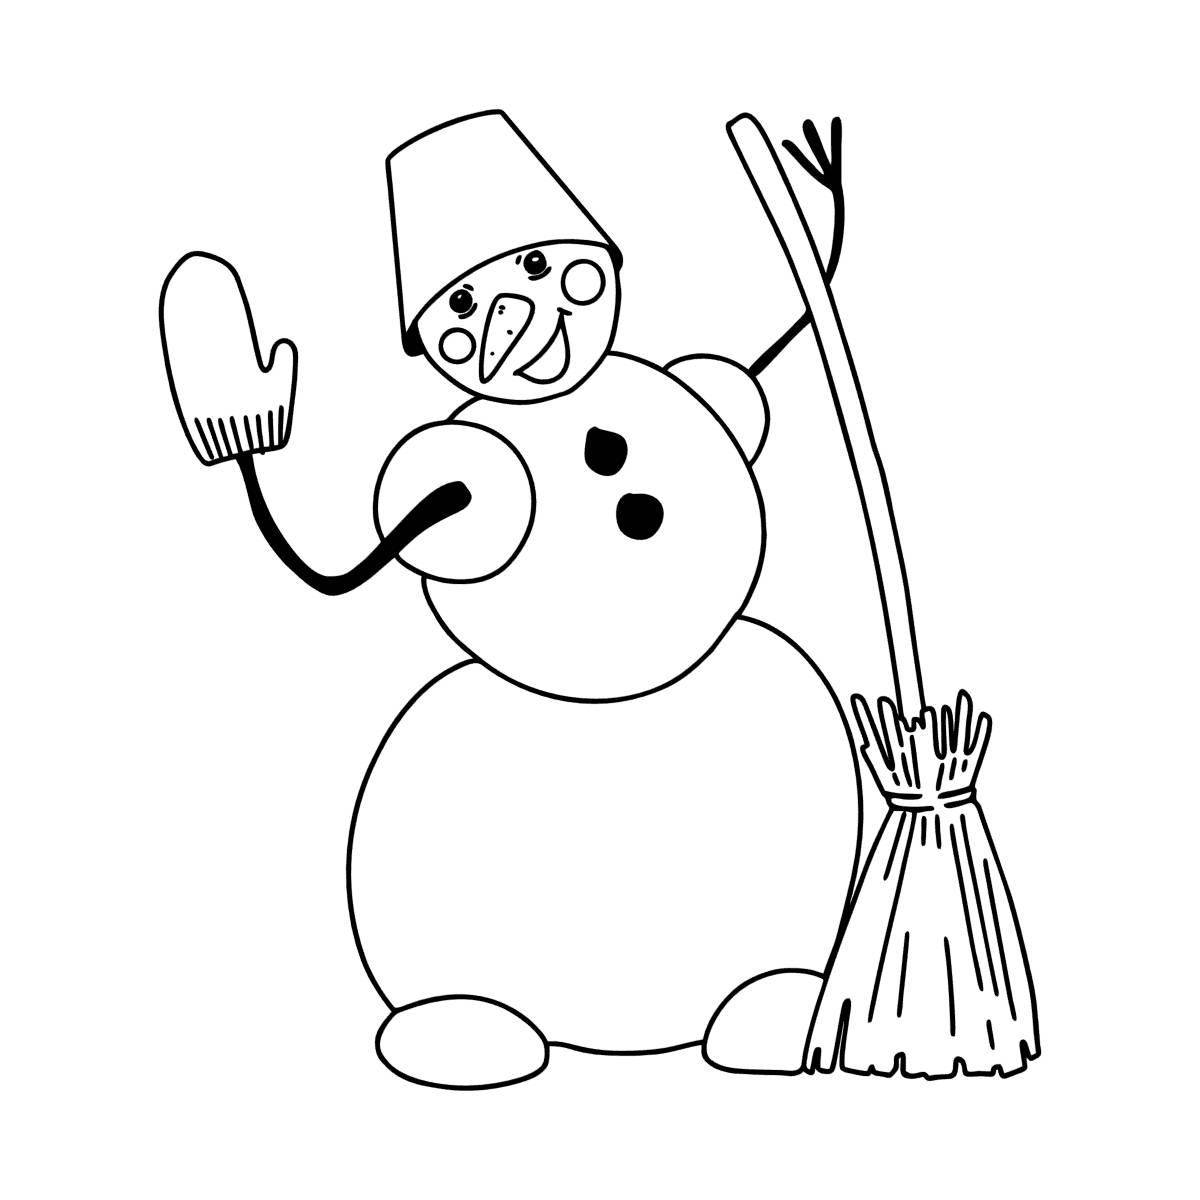 Glorious snowman coloring book for kids 4-5 years old